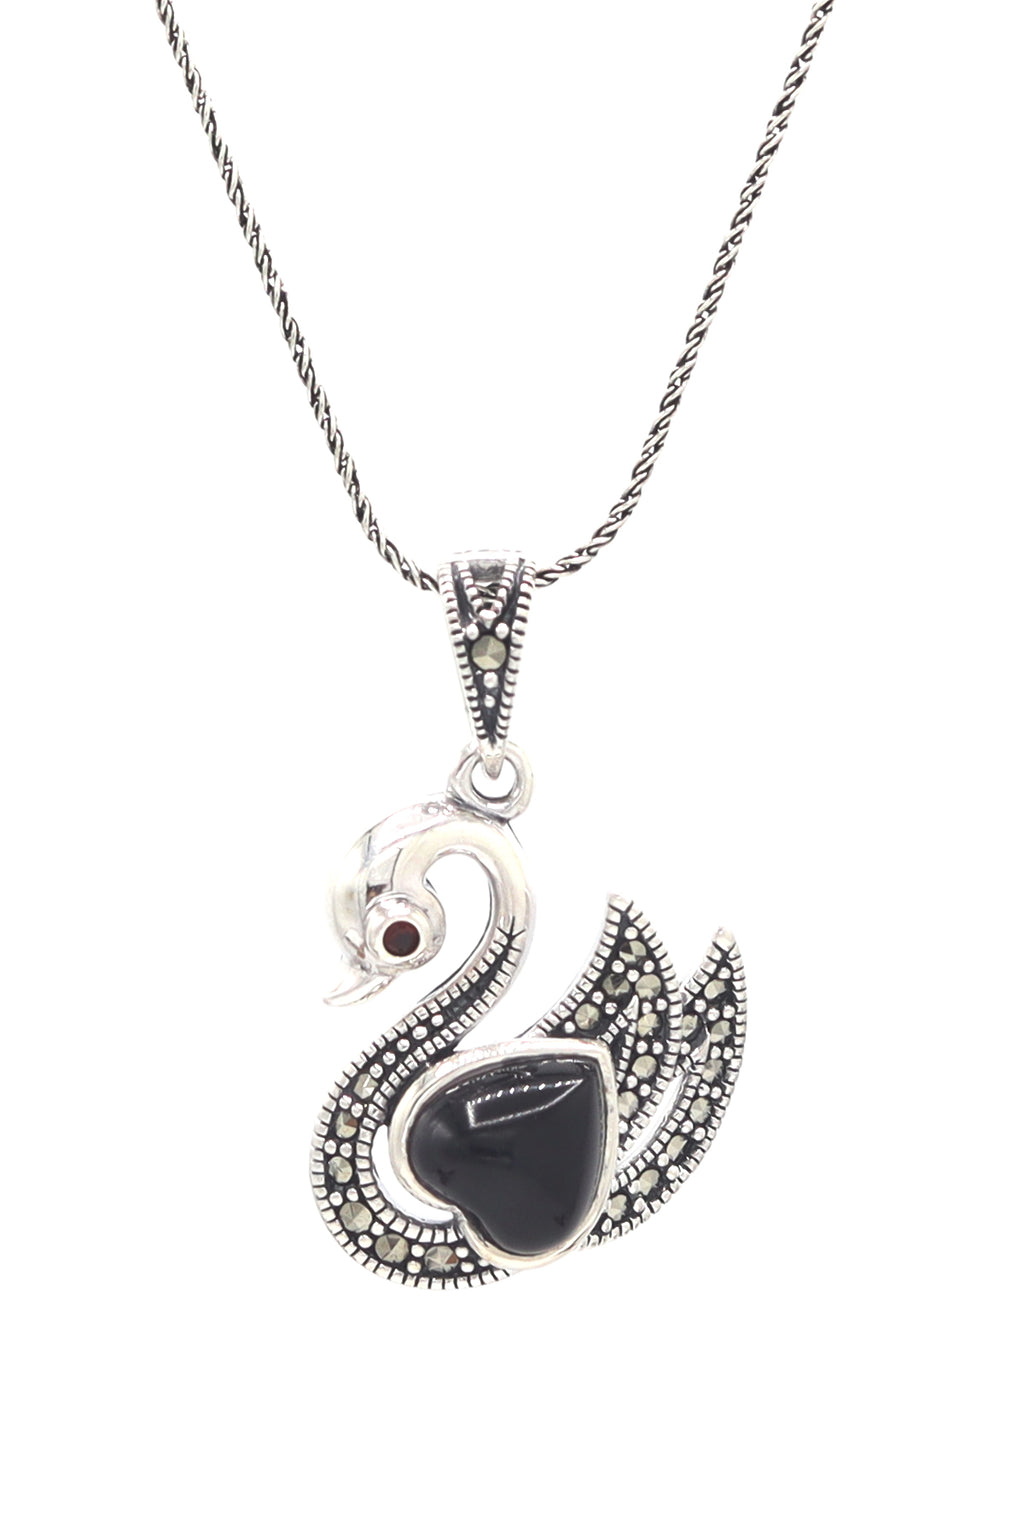 Swan Model Handmade Silver Necklace With Onyx (NG201021604)